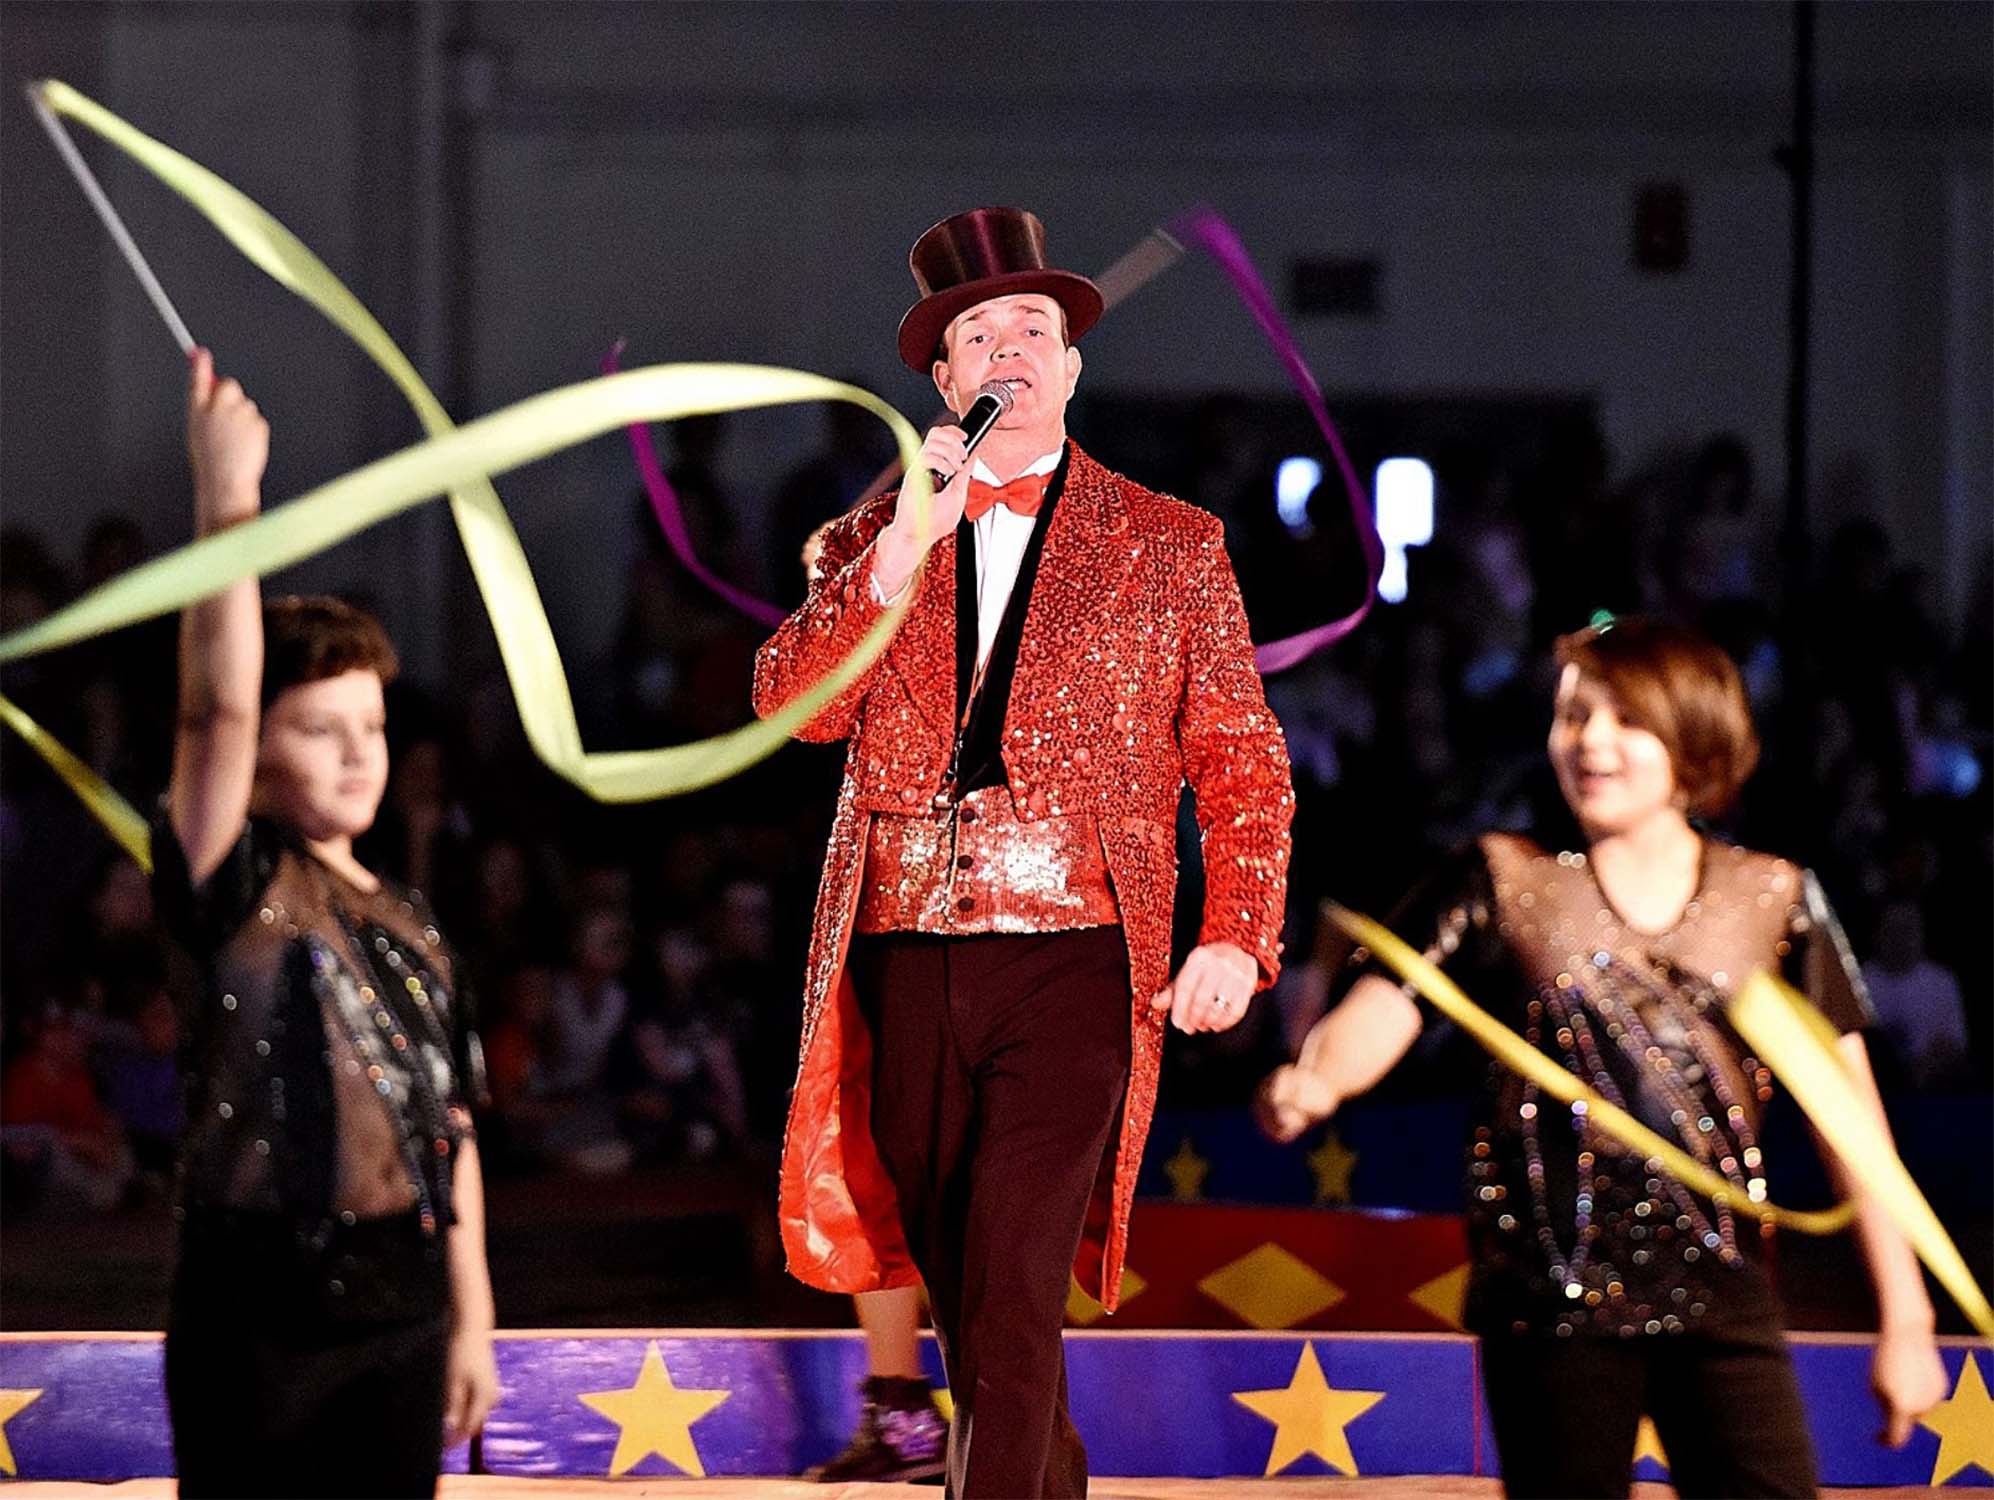 America’s favorite 3-Ring Circus comes to St. Clair County